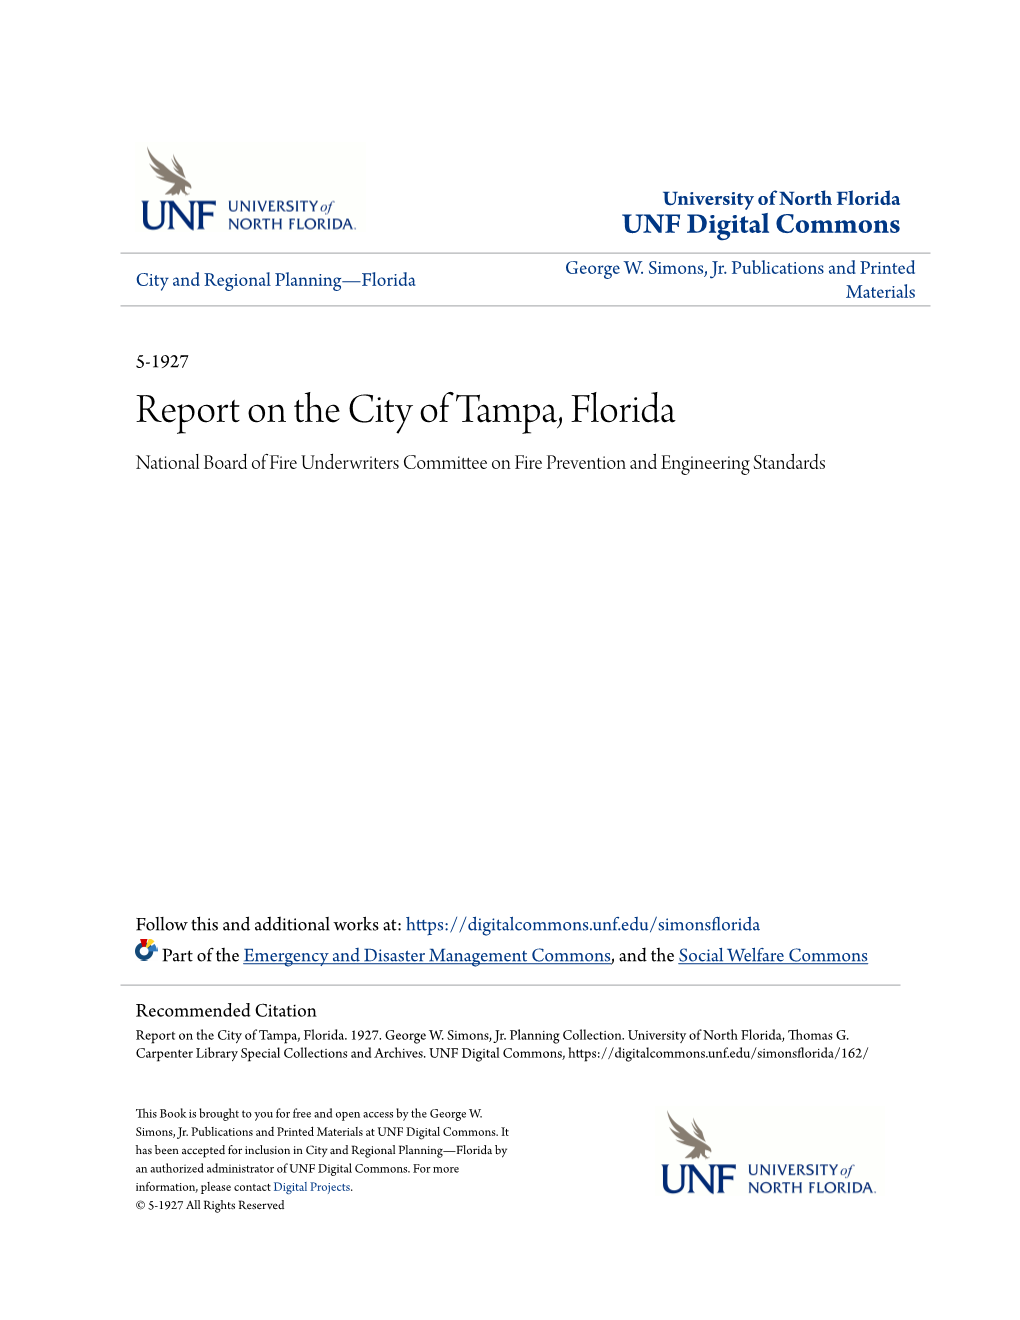 Report on the City of Tampa, Florida National Board of Fire Underwriters Committee on Fire Prevention and Engineering Standards